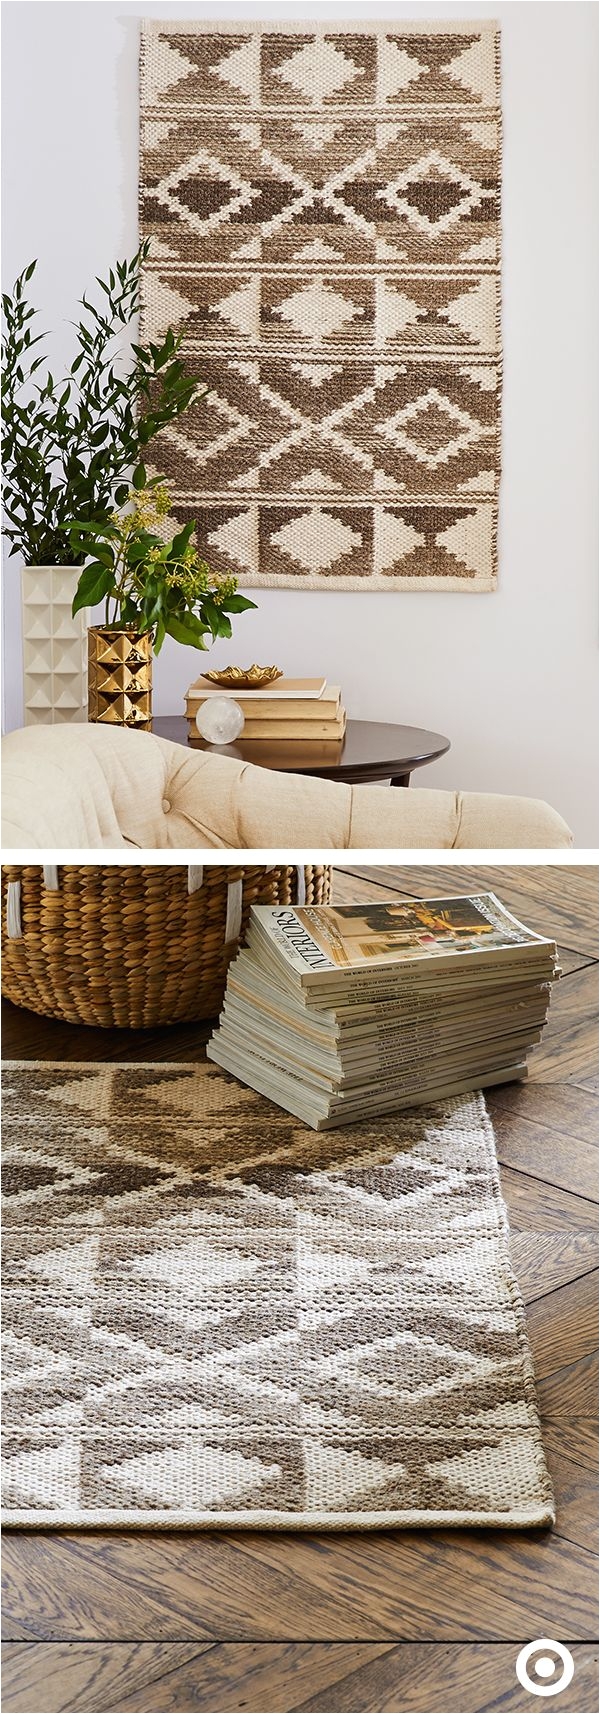 rug or wall art you decide this rug from nate berkus spring